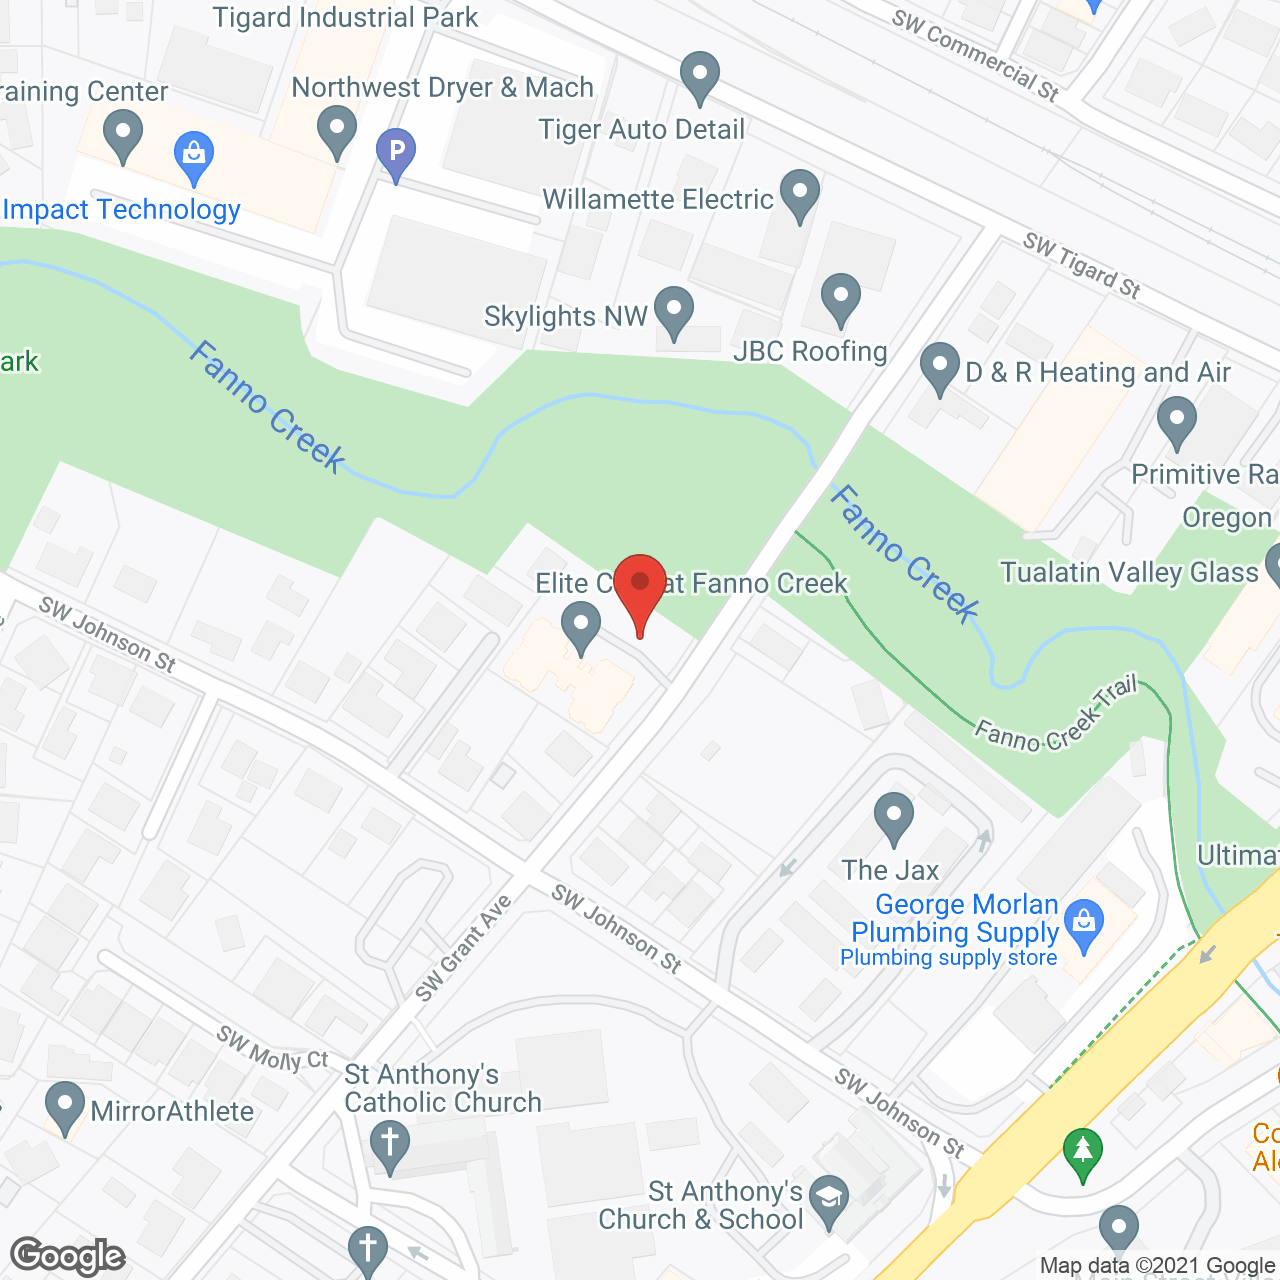 Fanno Creek by Elite Care in google map